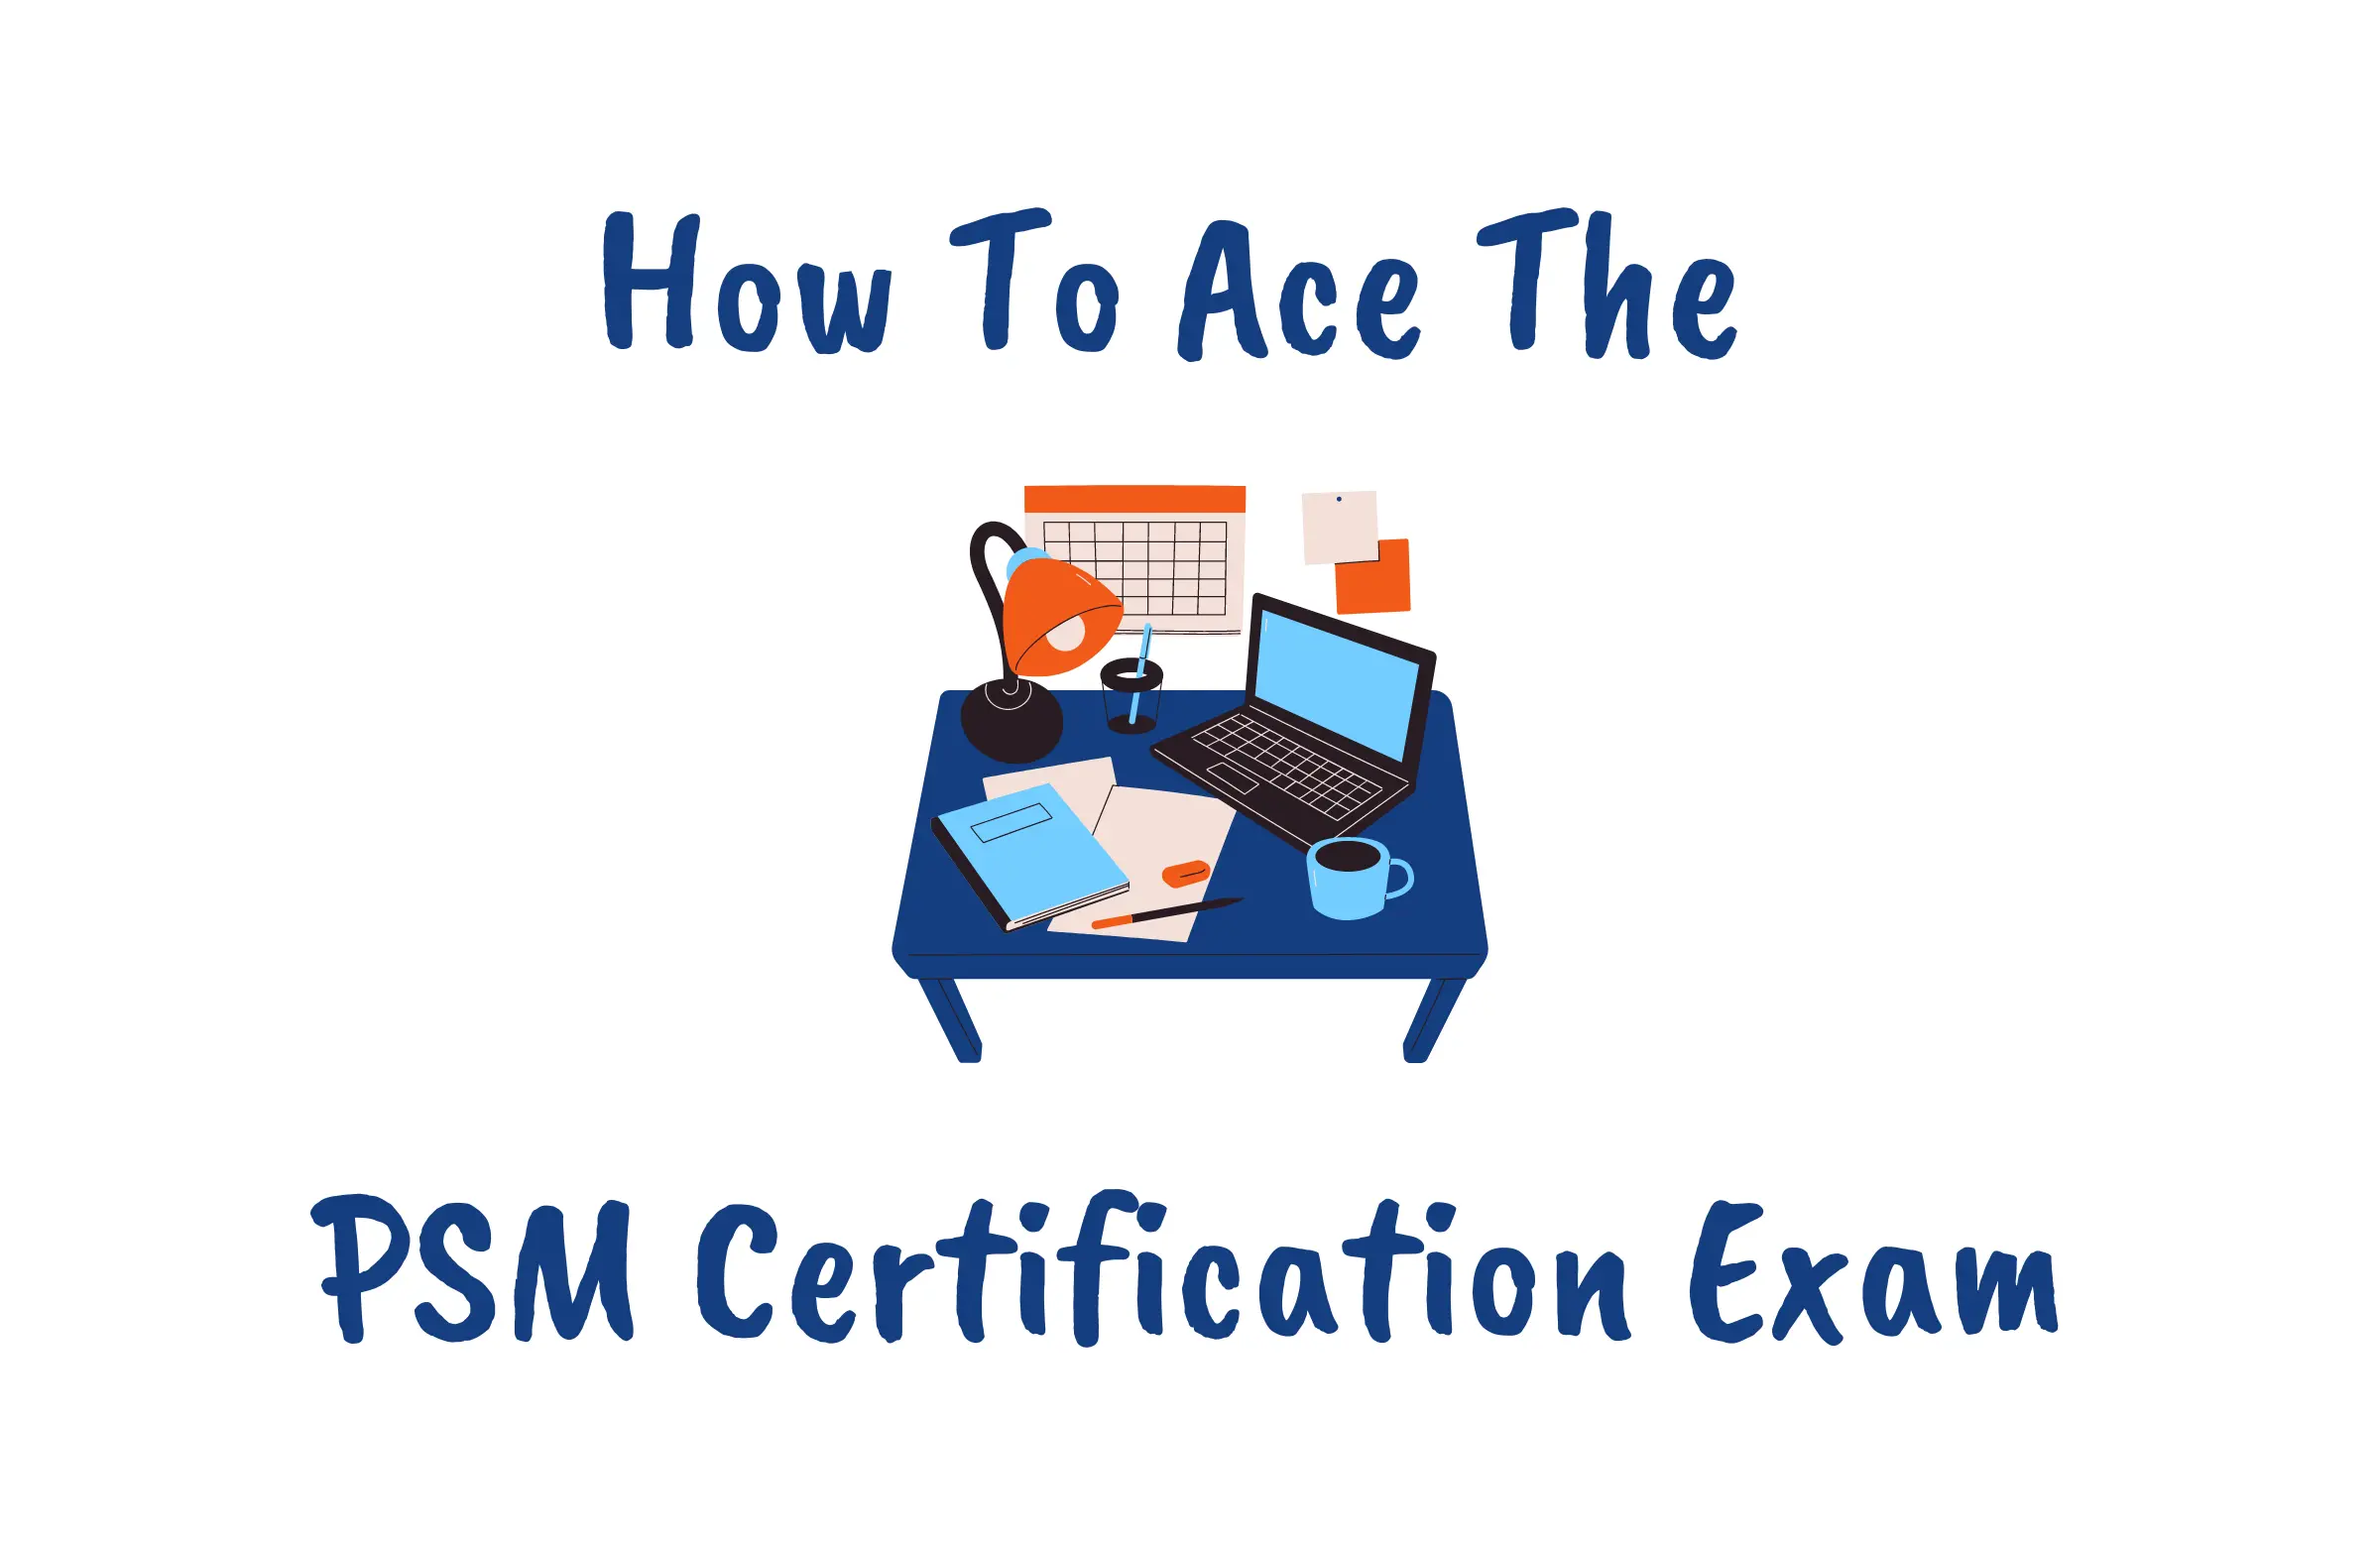 how to pass the PSM1 certification exam